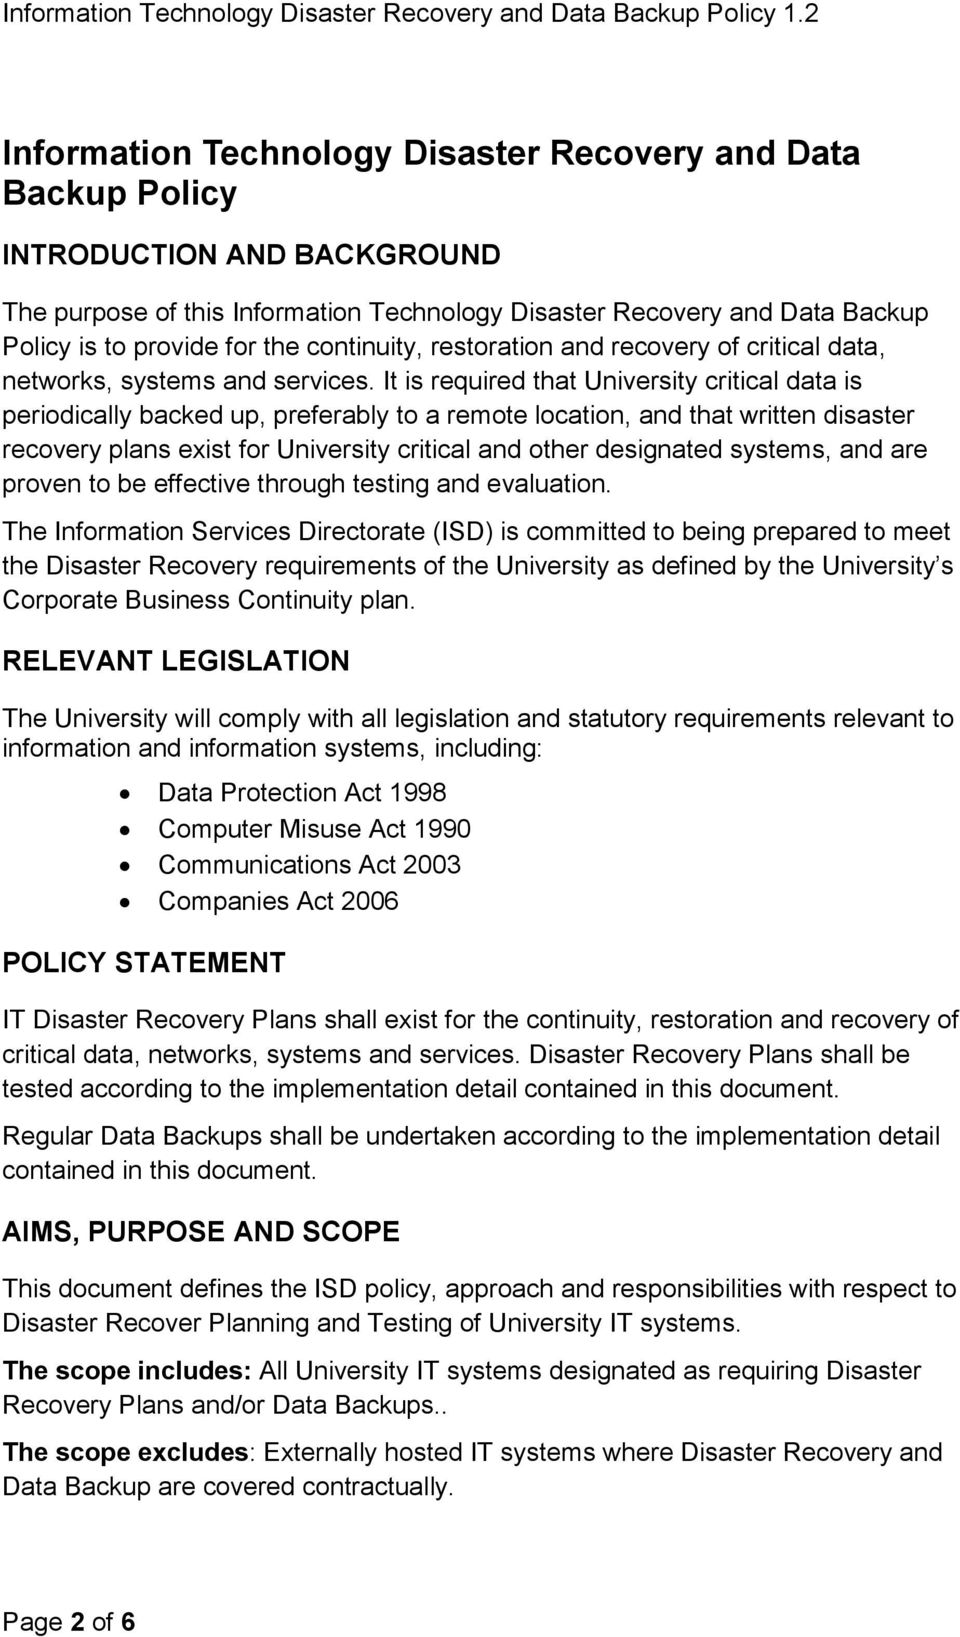 It is required that University critical data is periodically backed up, preferably to a remote location, and that written disaster recovery plans exist for University critical and other designated